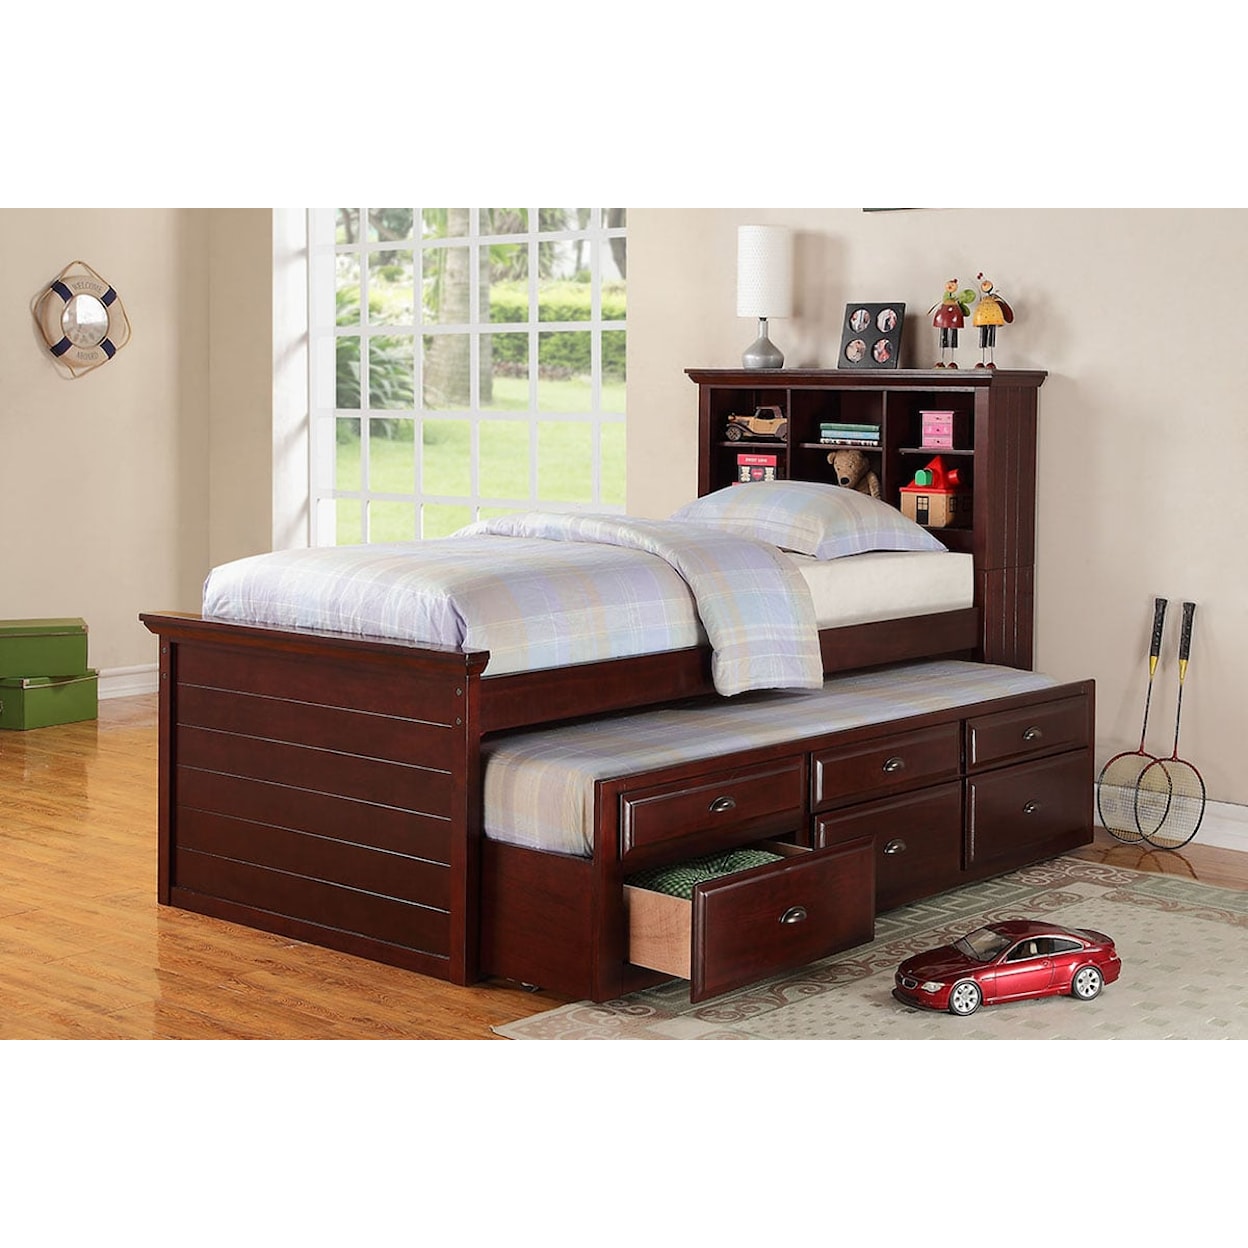 Poundex Trundle Beds NANTUCKET BROWN TWIN TRUNDLE BED |